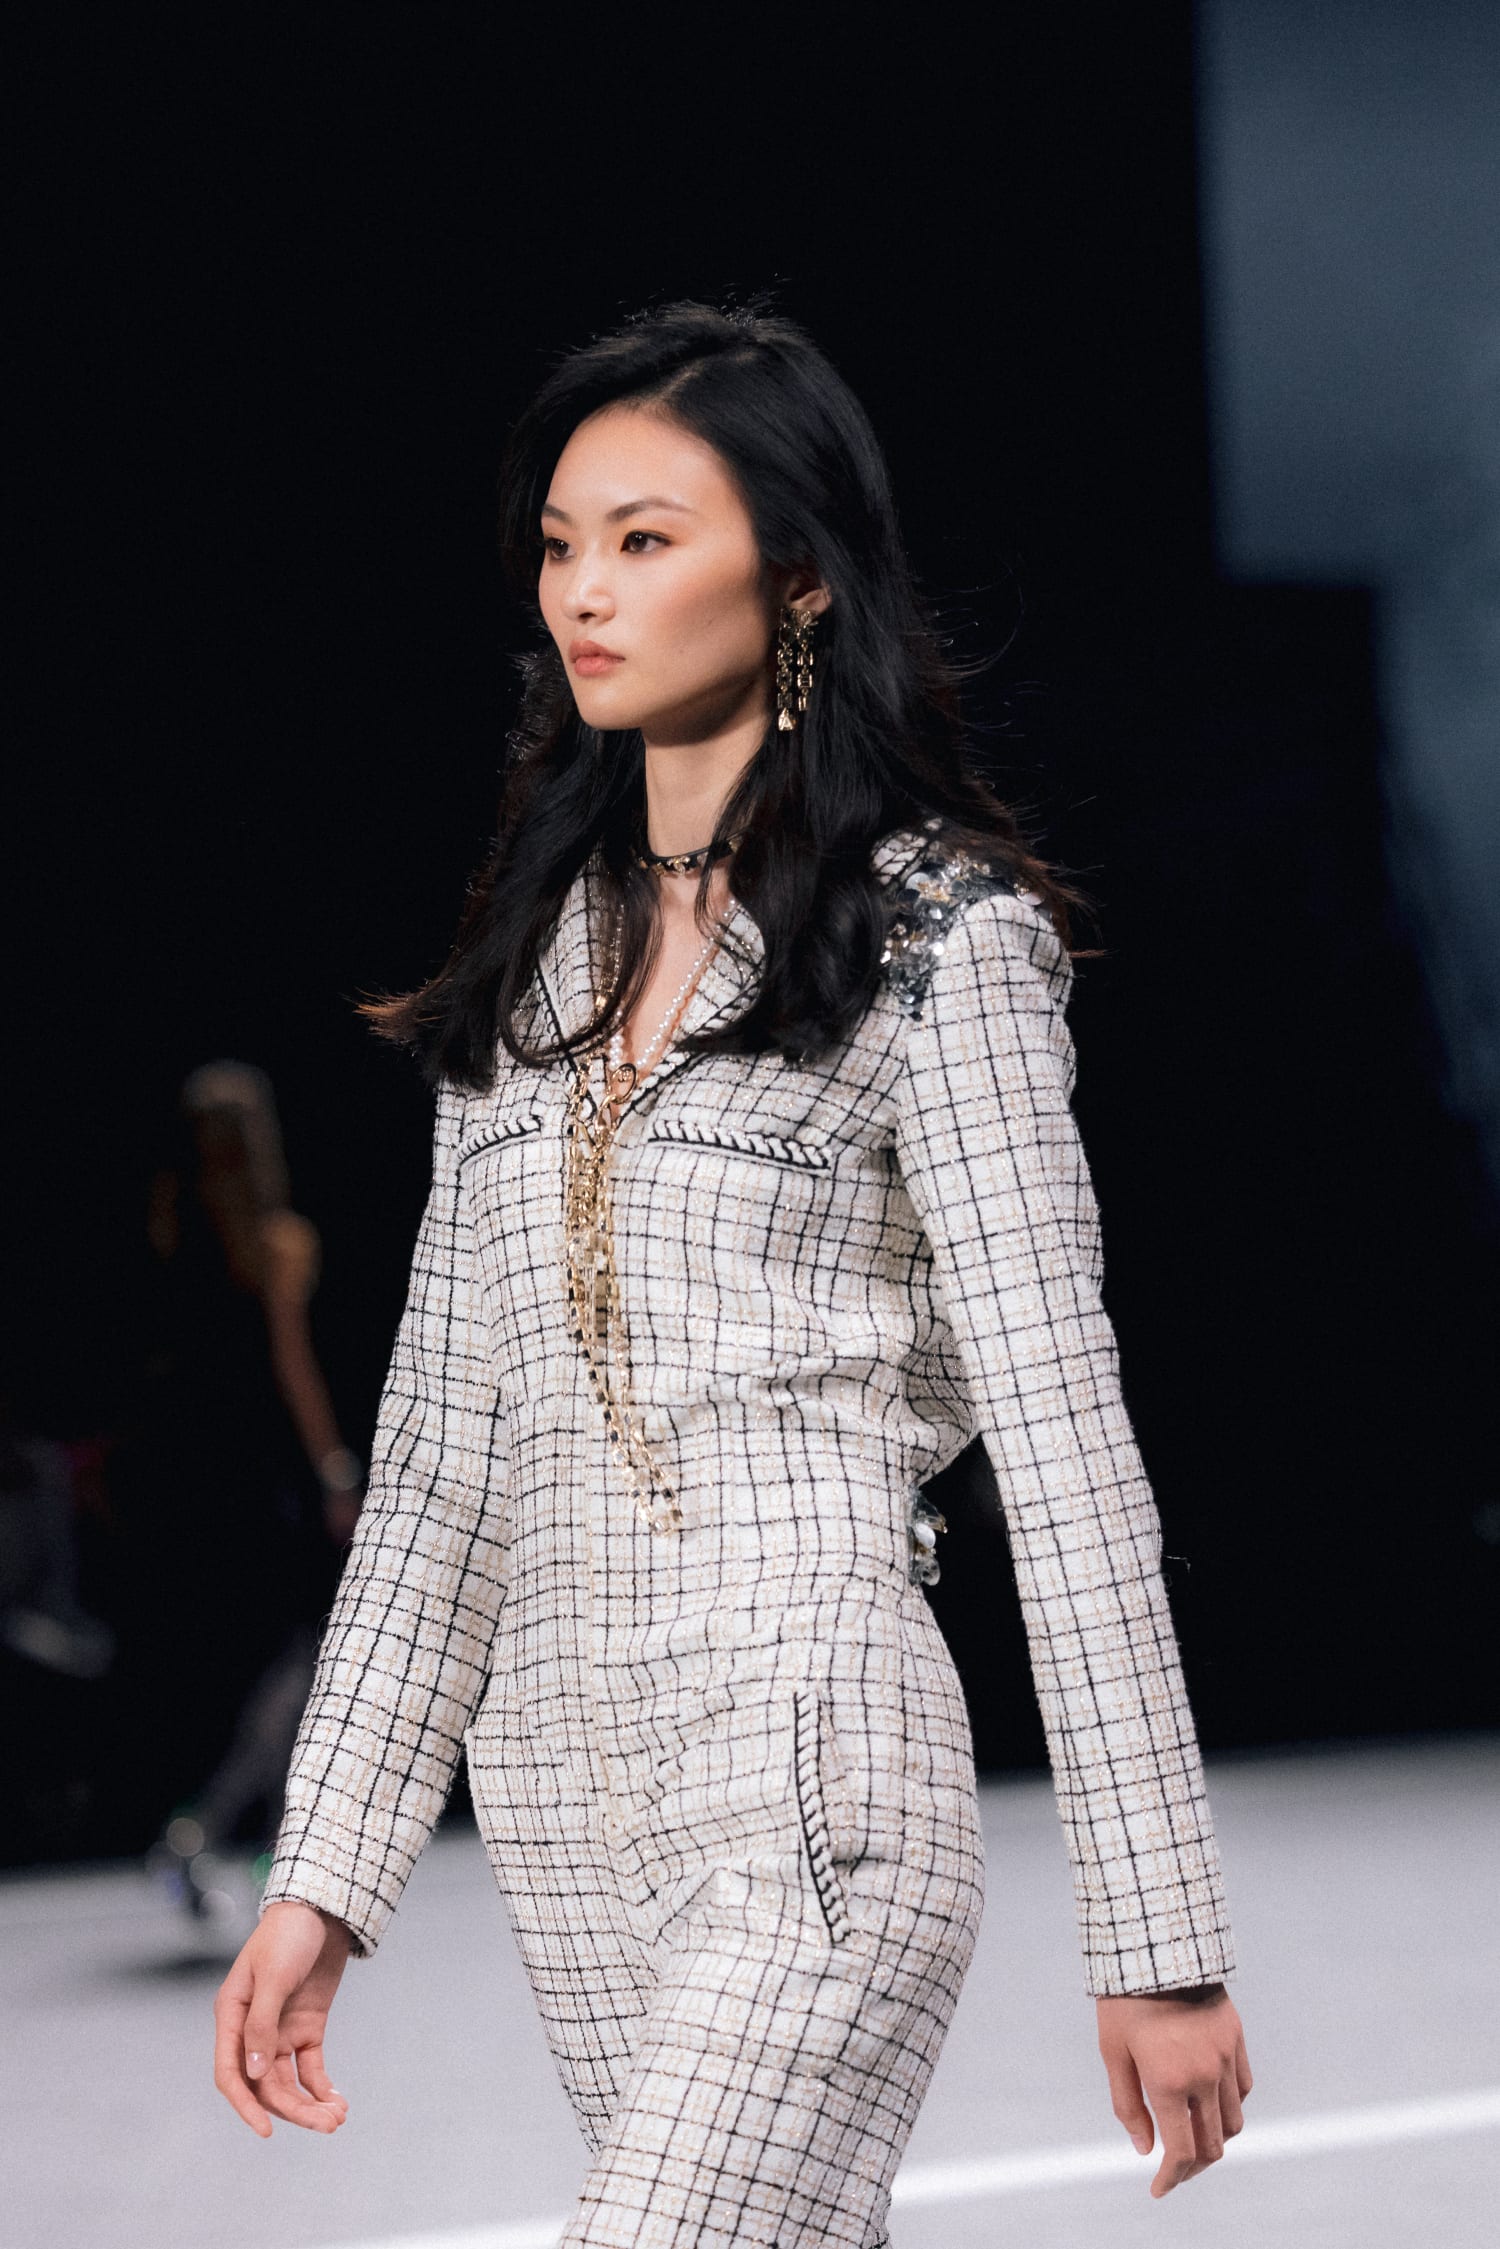 chanel_cruise-2023-24-show-in-shenzhen_ambiance-pictures-38-LD